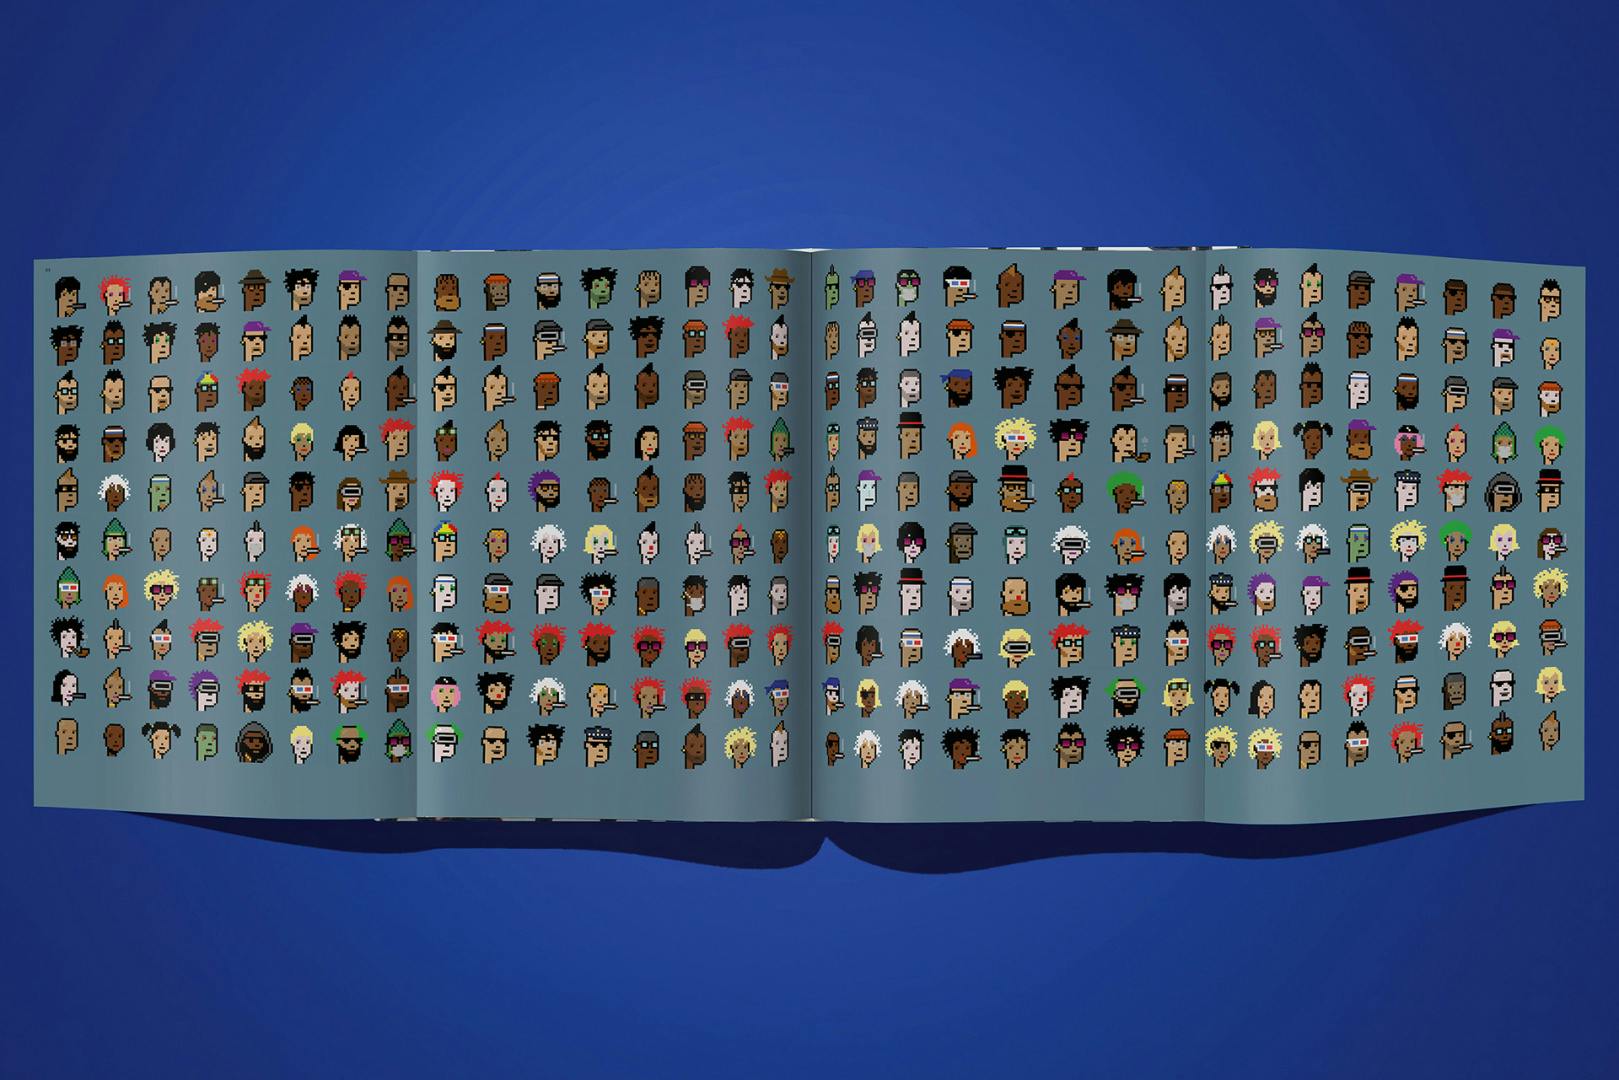 Image shows a spread from On NFTs by Robert Alice on a bright blue background. The pull-out spread features 8-bit avatars of people's faces